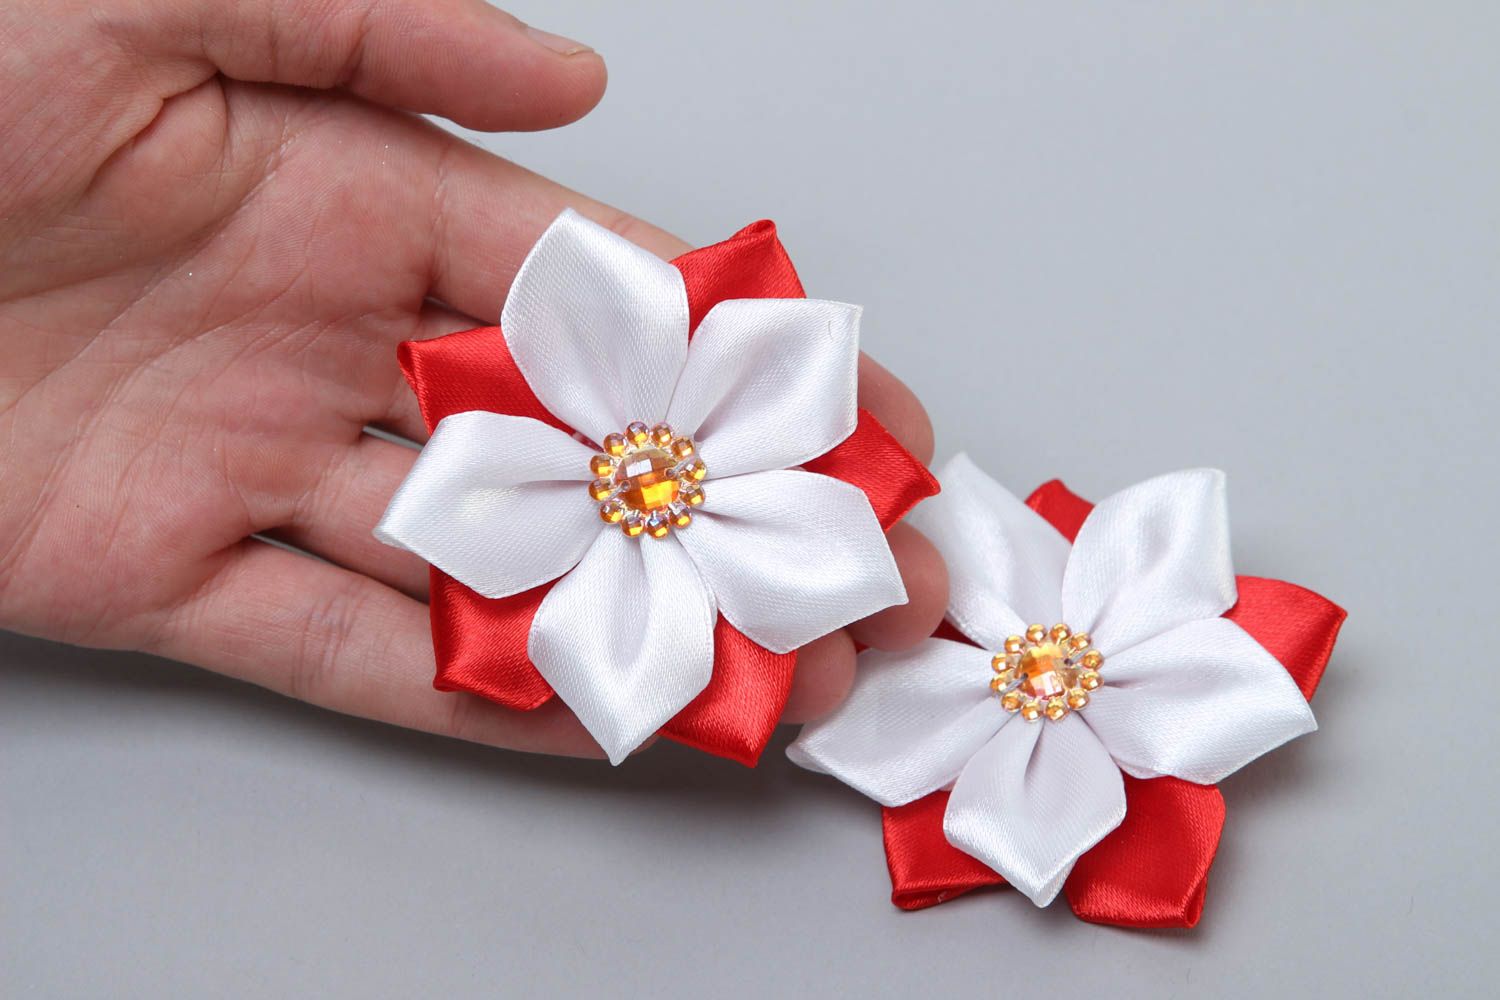 Handmade jewelry flower hair clips flowers for hair hair decorations cool gifts photo 5